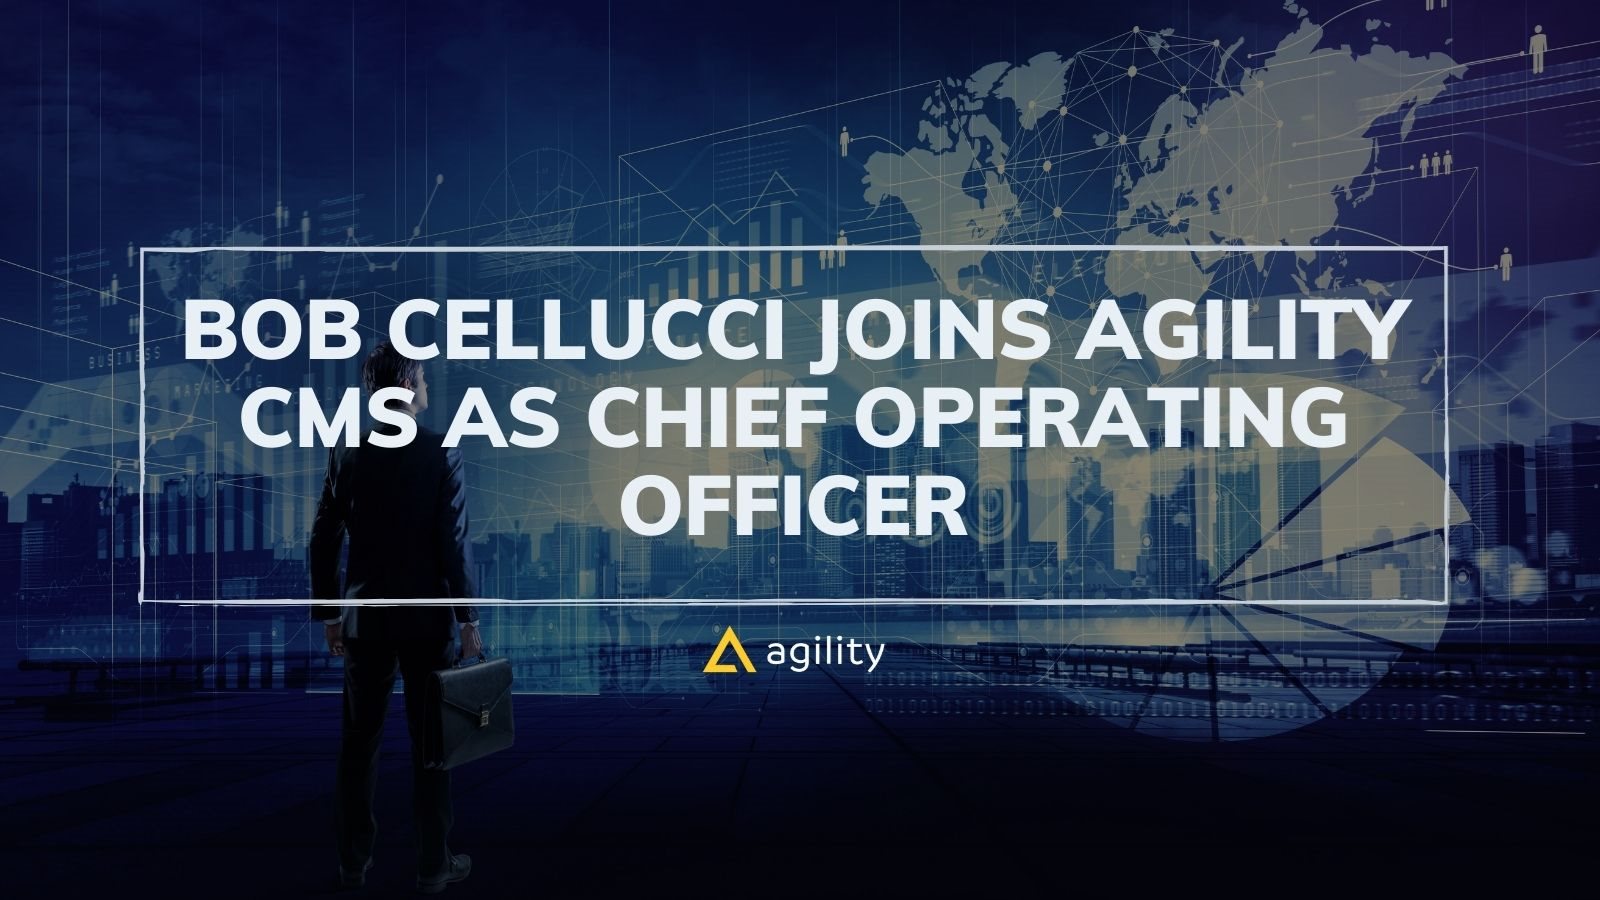 Bob Cellucci Joins Agility CMS as Chief Operating Officer